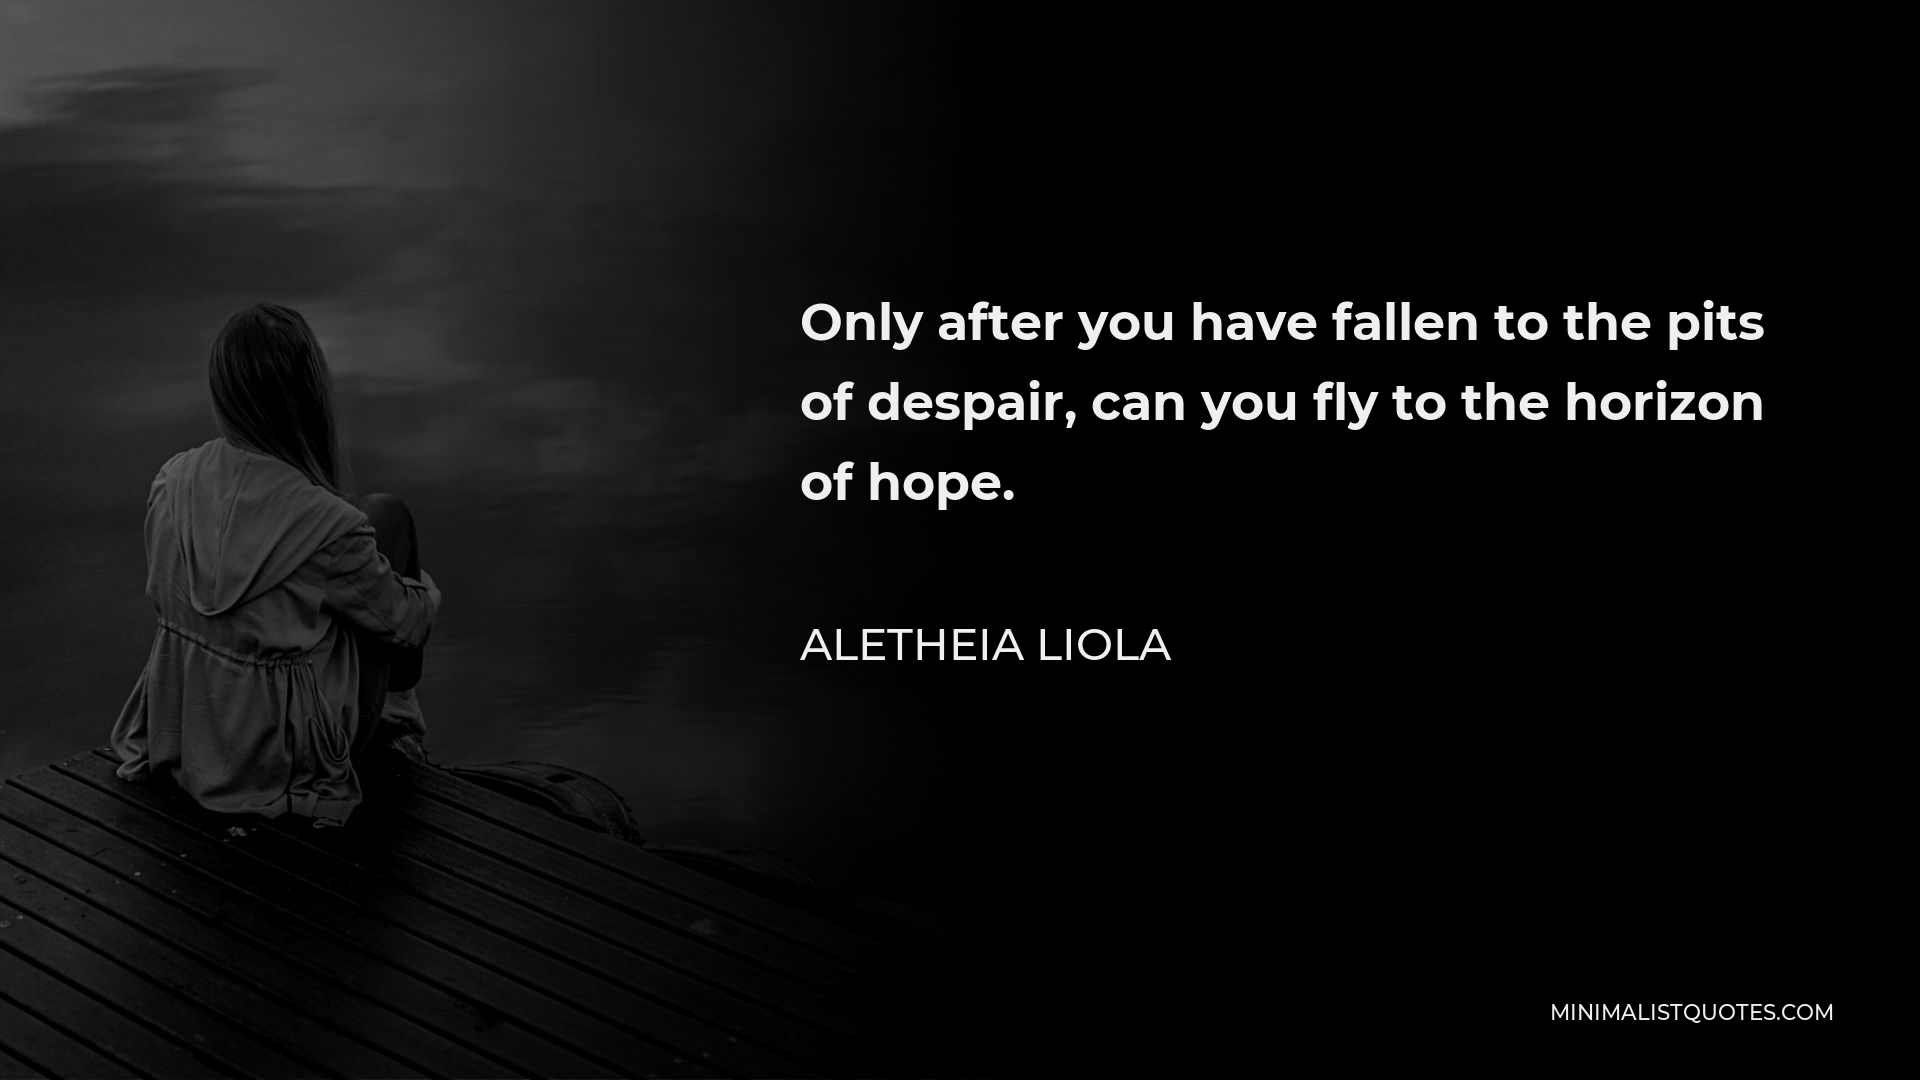 Aletheia Liola Quote - Only after you have fallen to the pits of despair, can you fly to the horizon of hope.